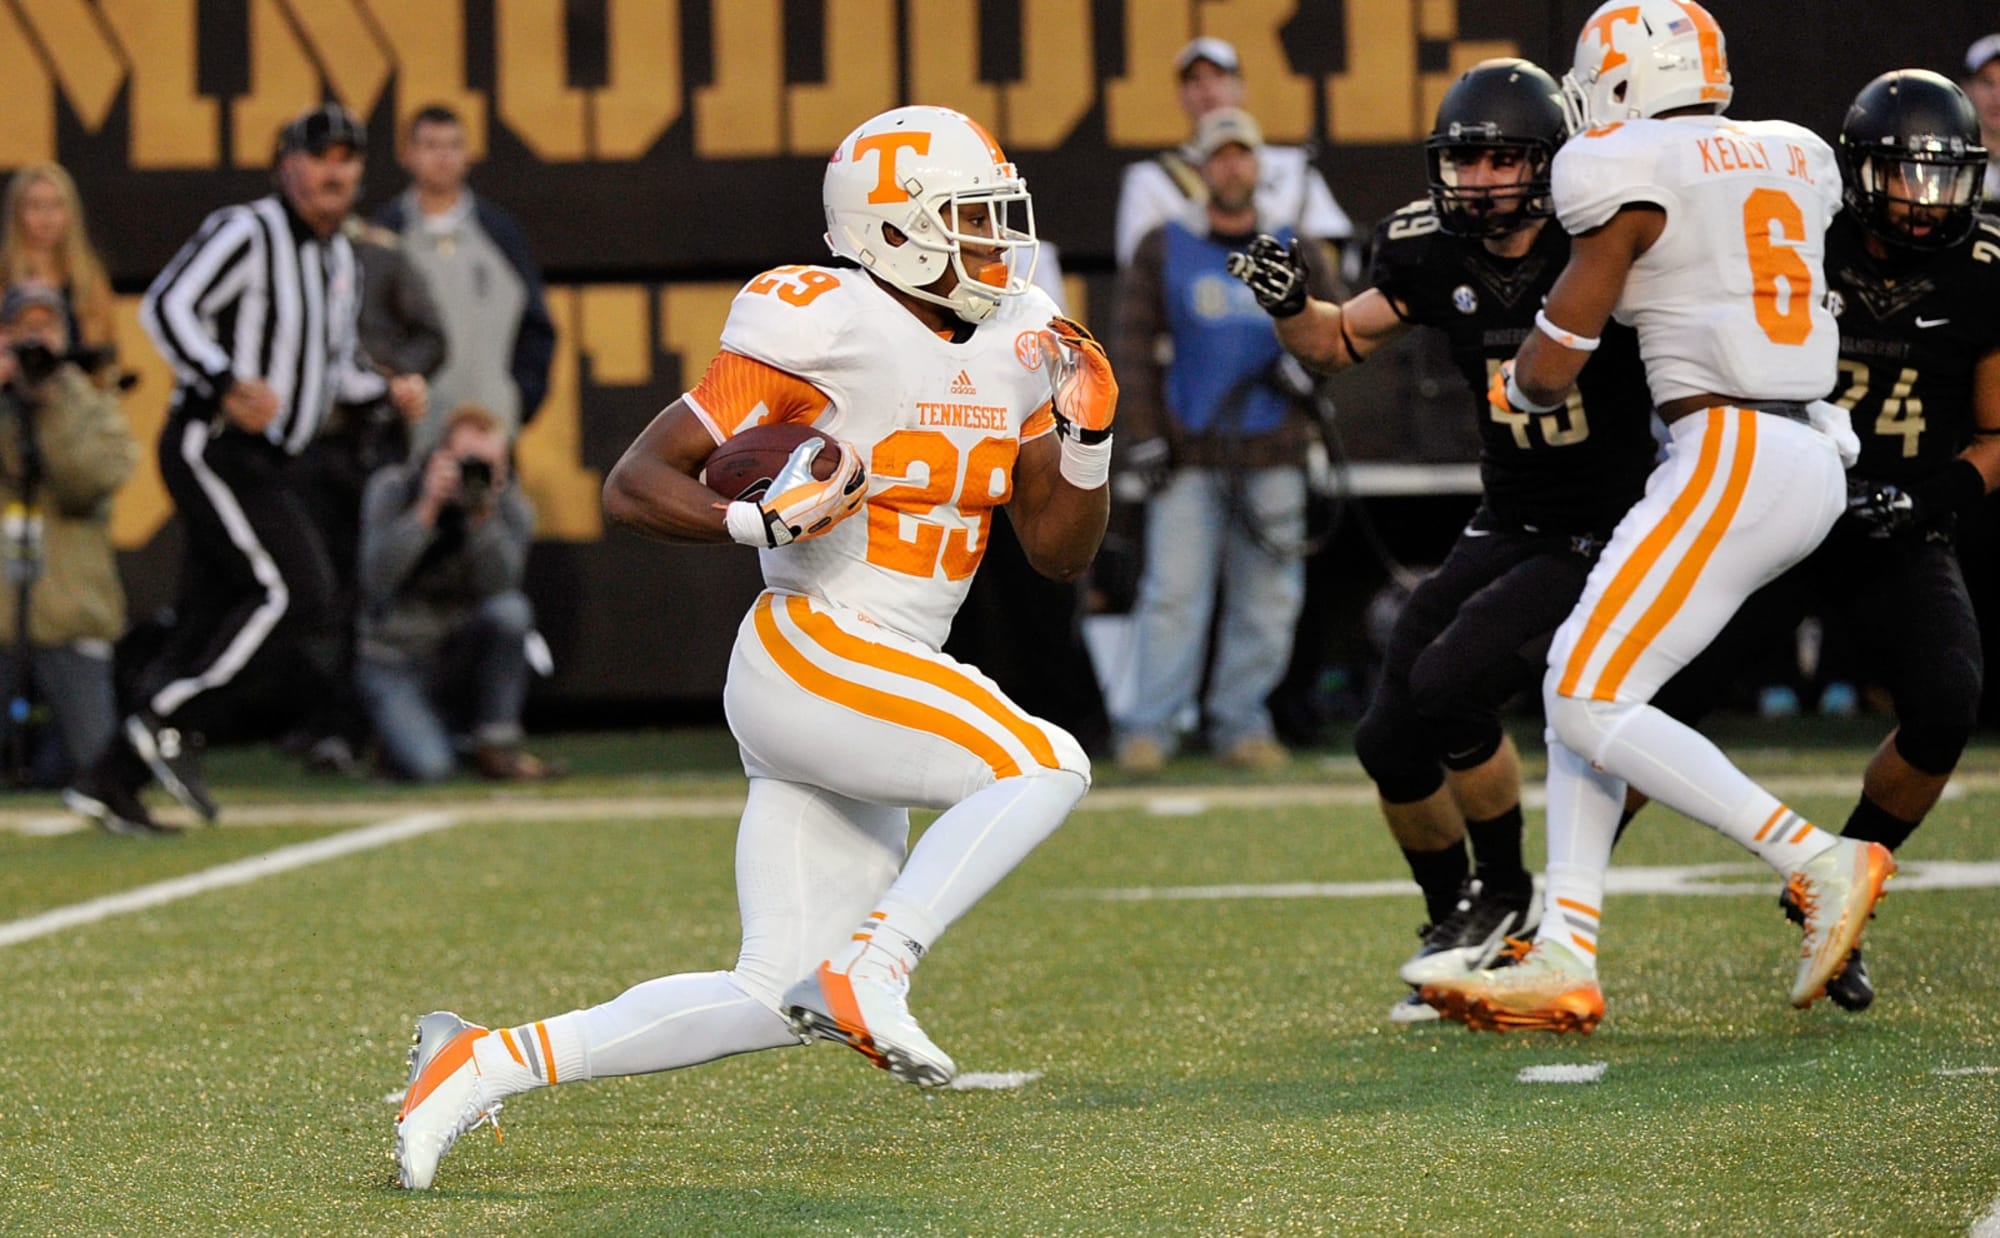 return-of-double-stripes-brings-another-change-to-tennessee-s-uniforms